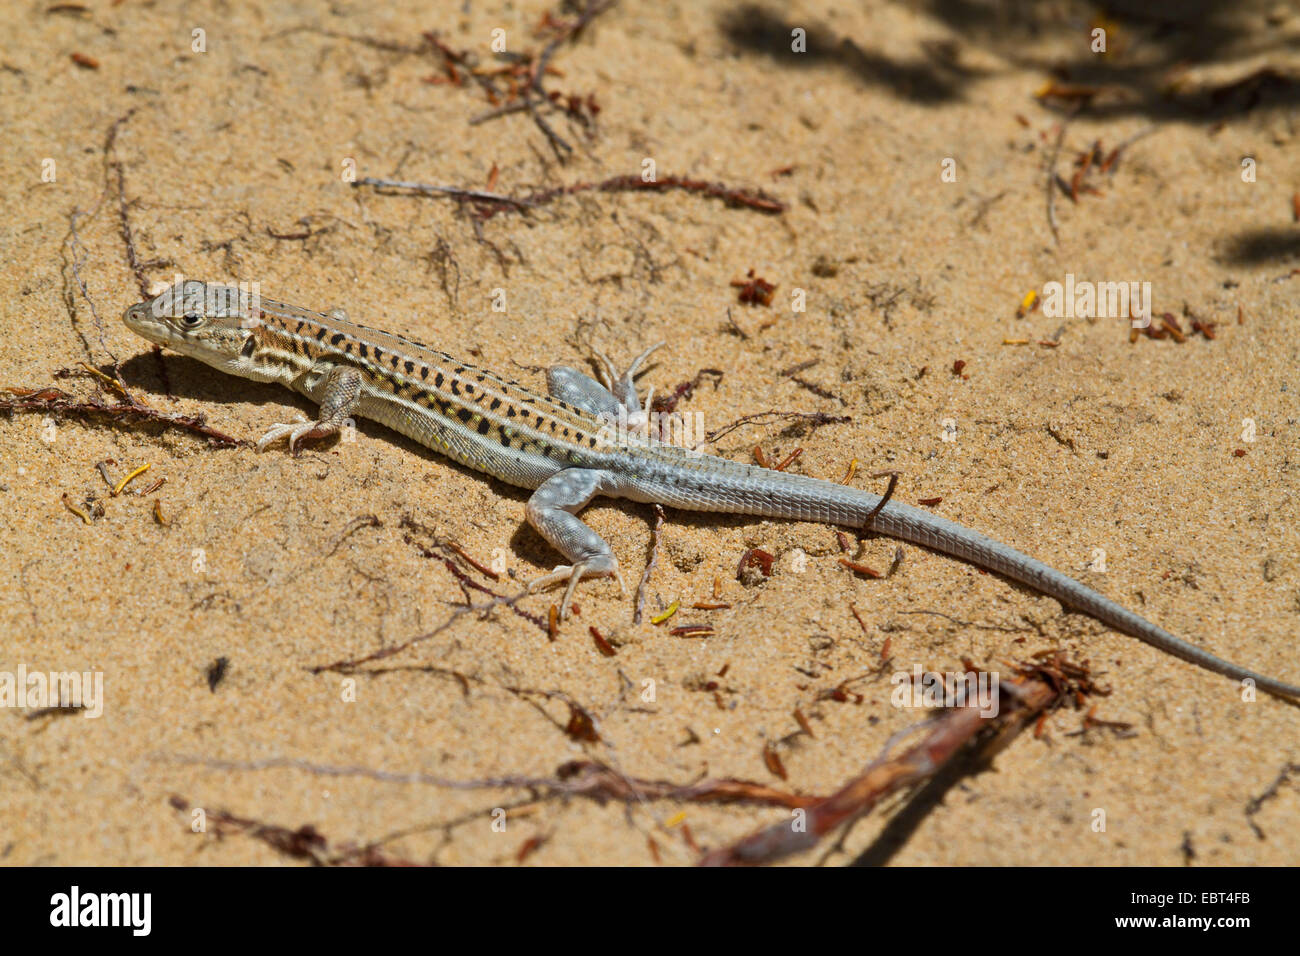 spiny-footed lizard, fringe-fingered lizard (Acanthodactylus erythrurus), sitting on the ground, Spain, Andalusia, Coto De Donana National Park Stock Photo